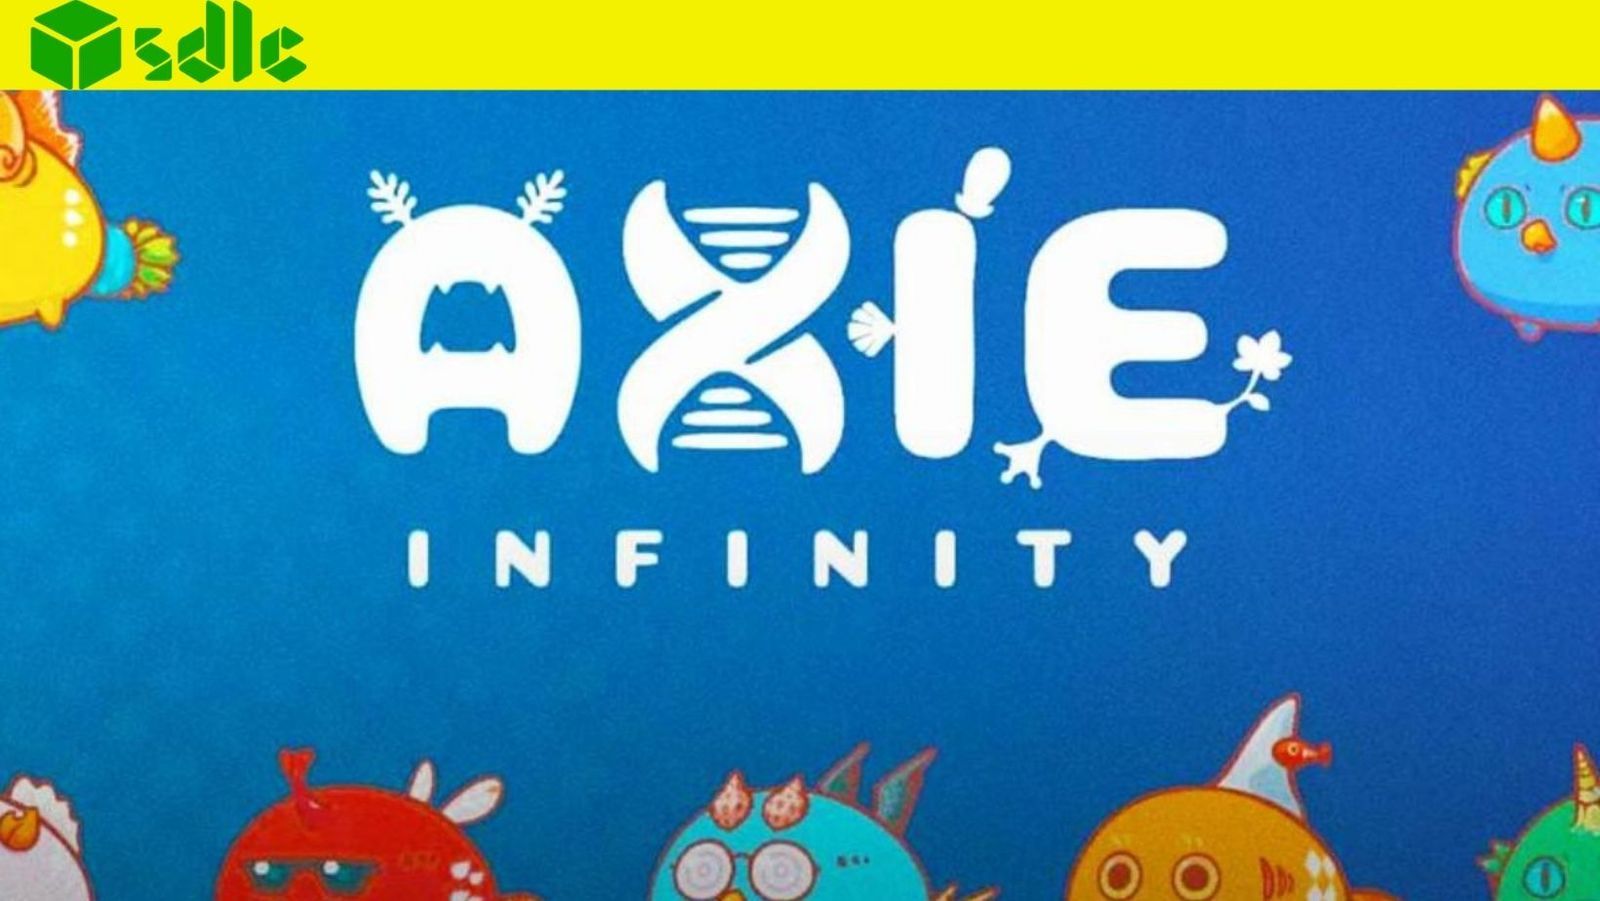 Some Important Things To Know About Axie Infinity Marketplace